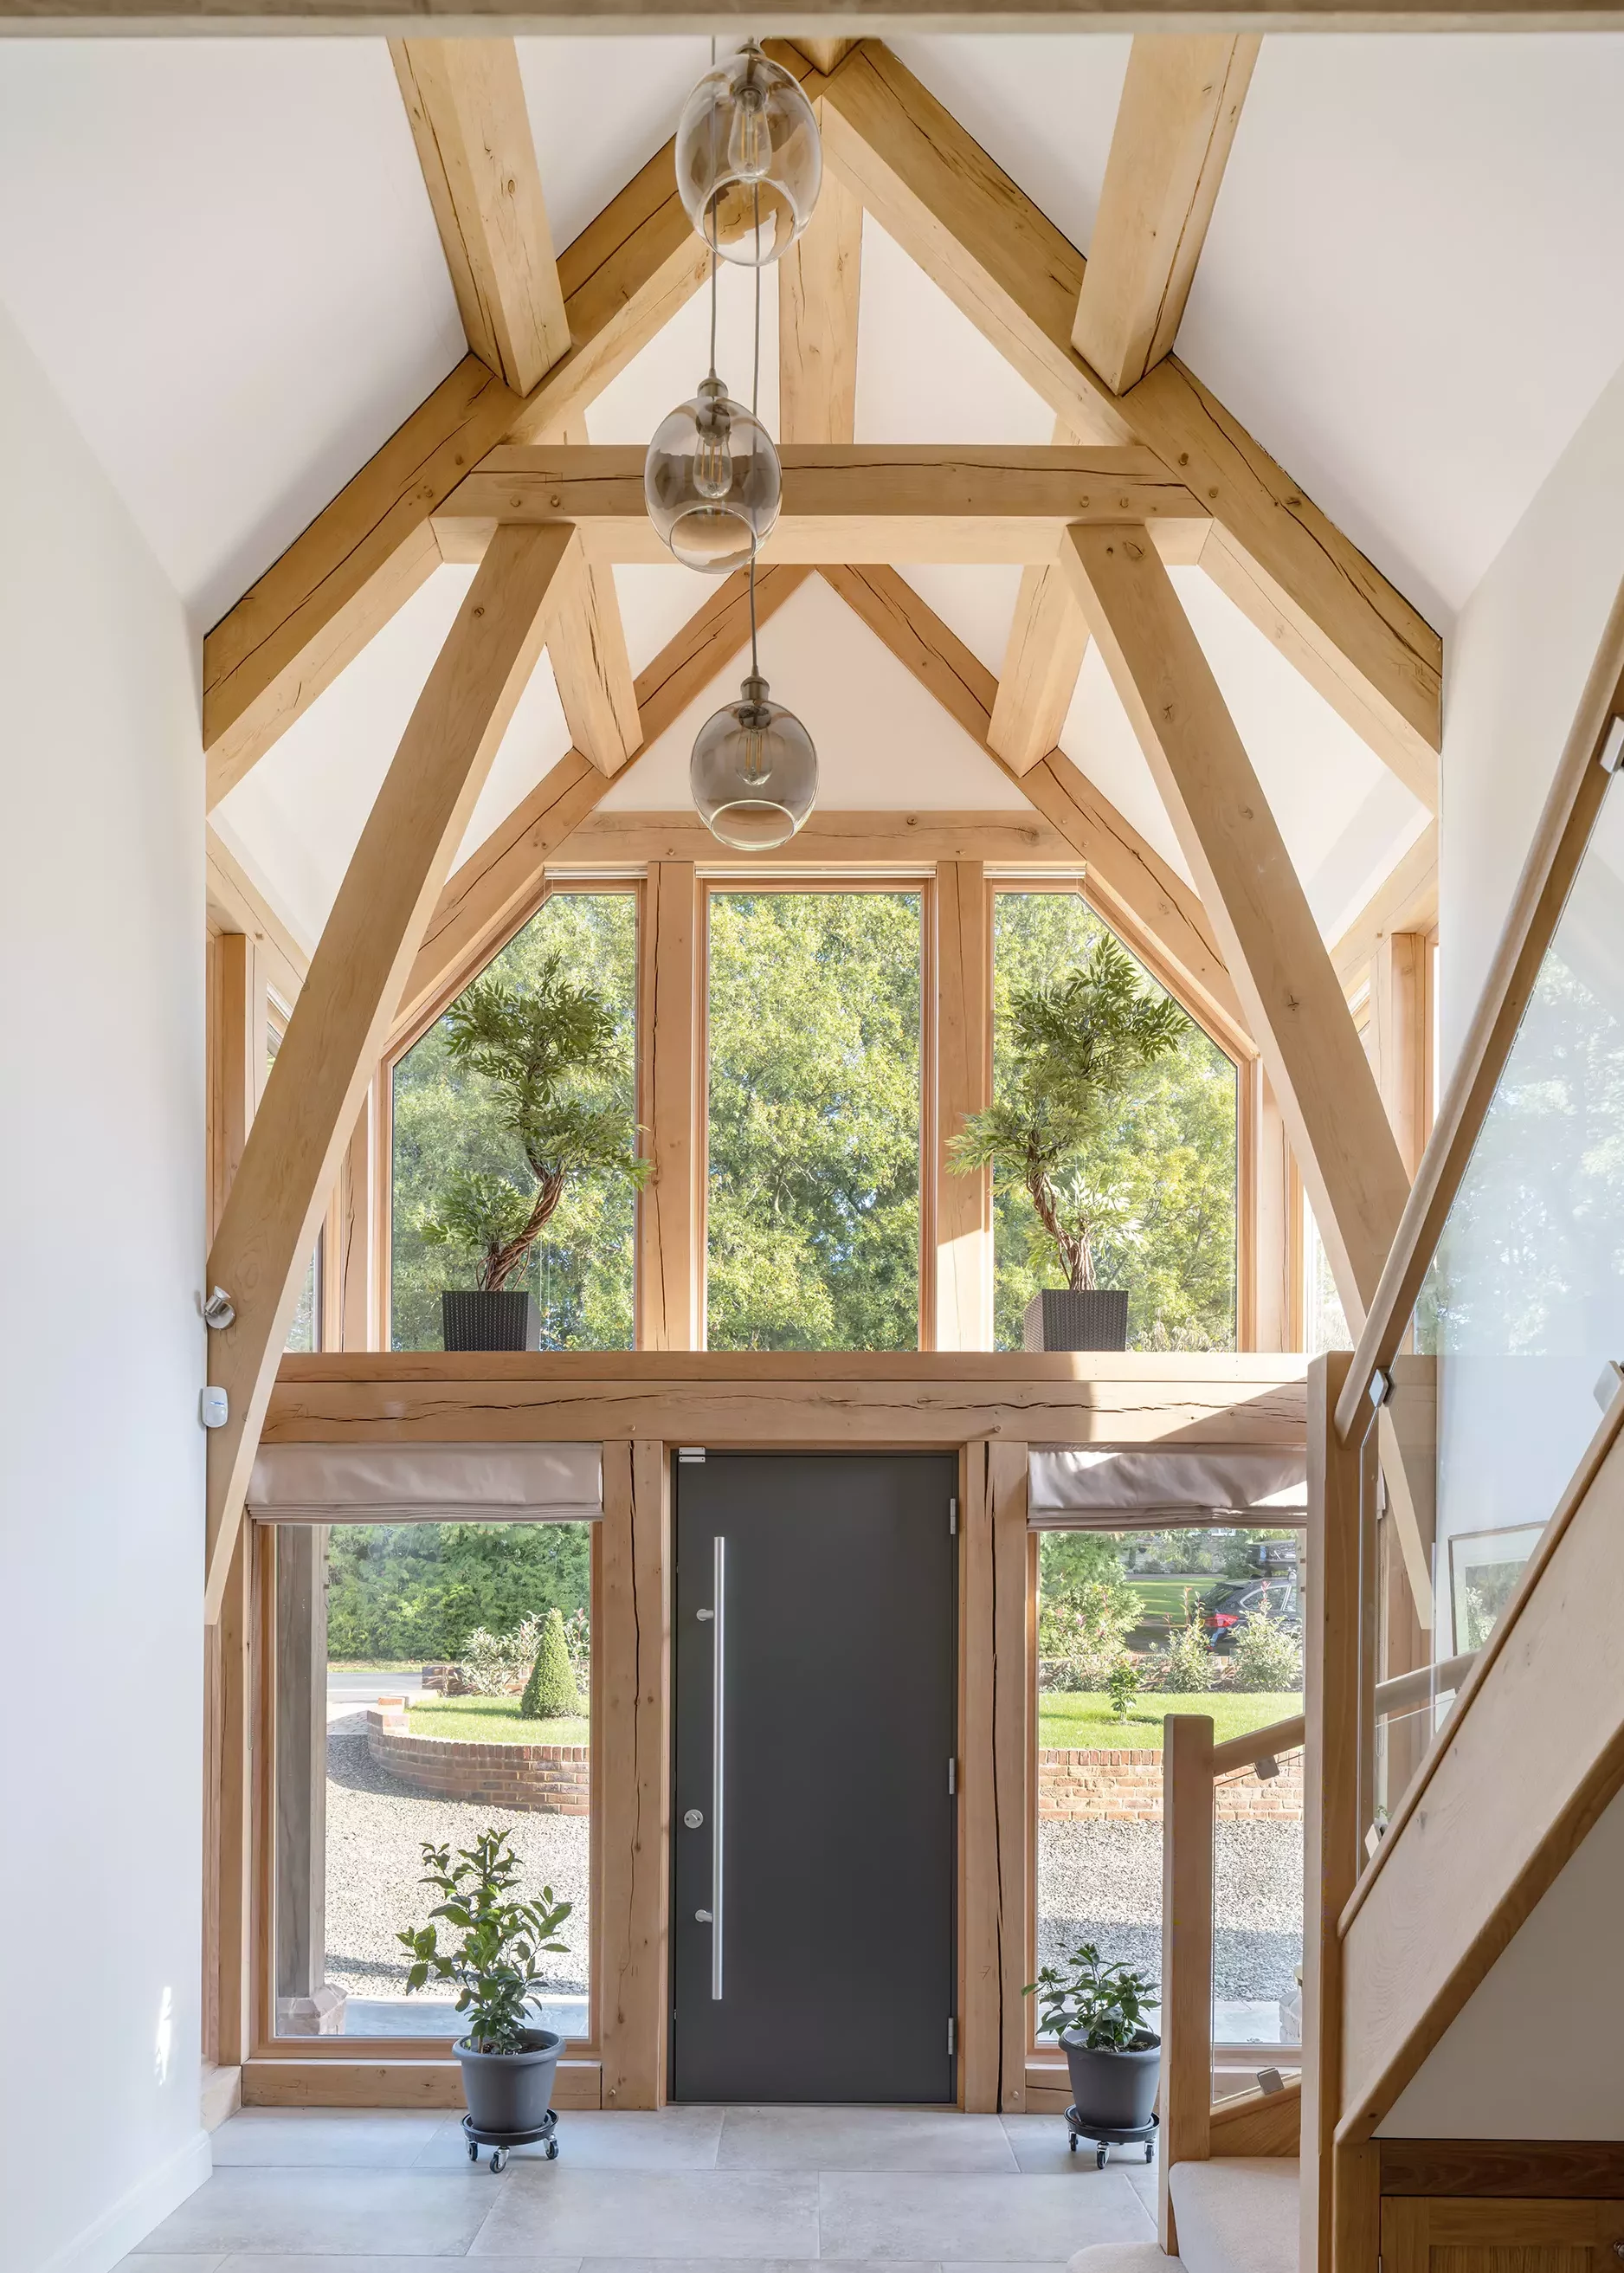 hallway with vaulted ceilings and exposed oak frame trusses